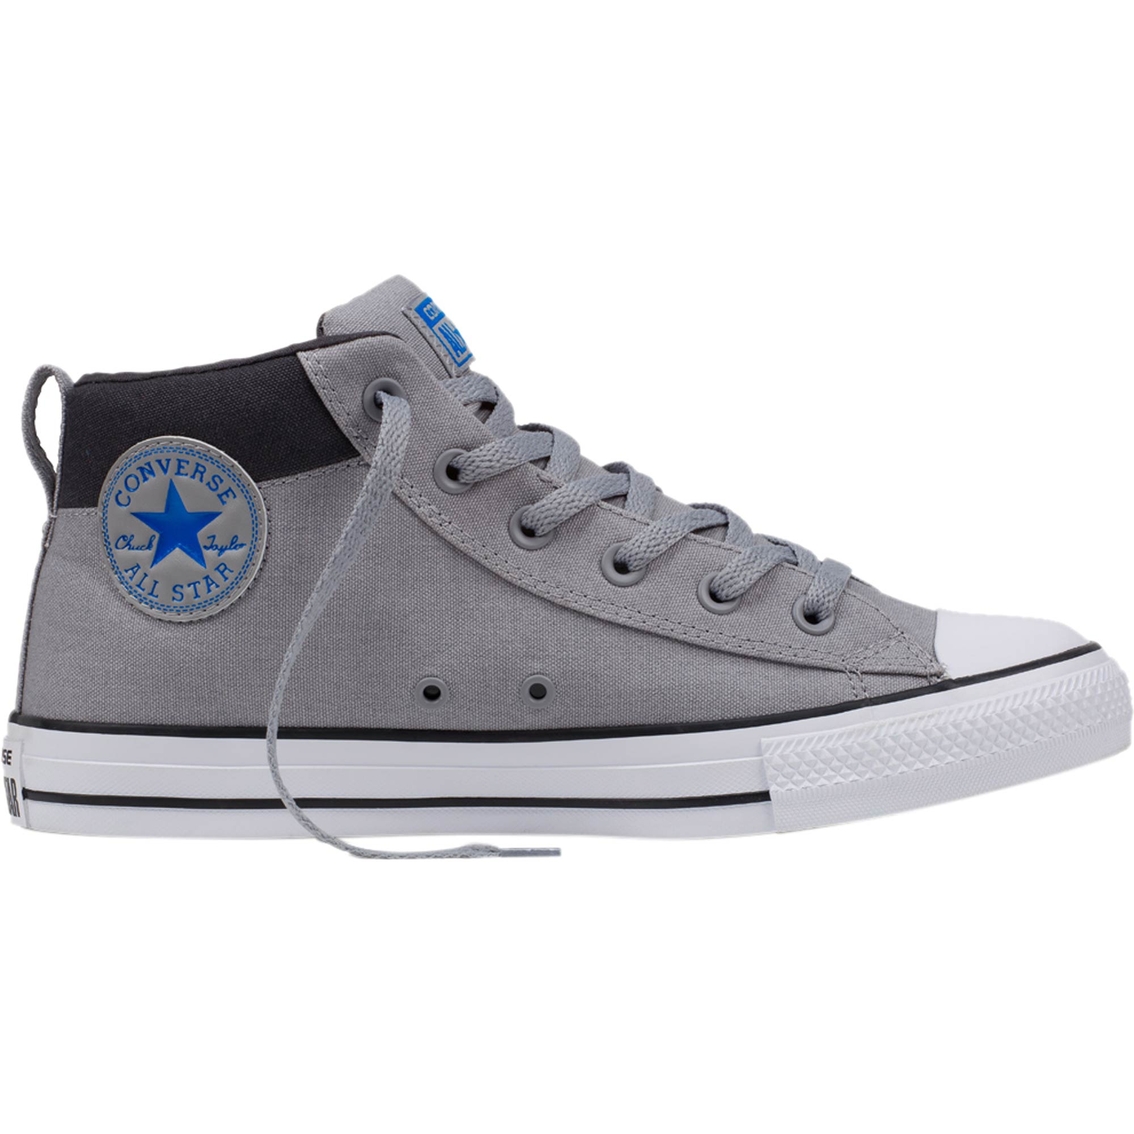 Converse Men's Chuck Taylor All Star High Street Mid Sneakers ...